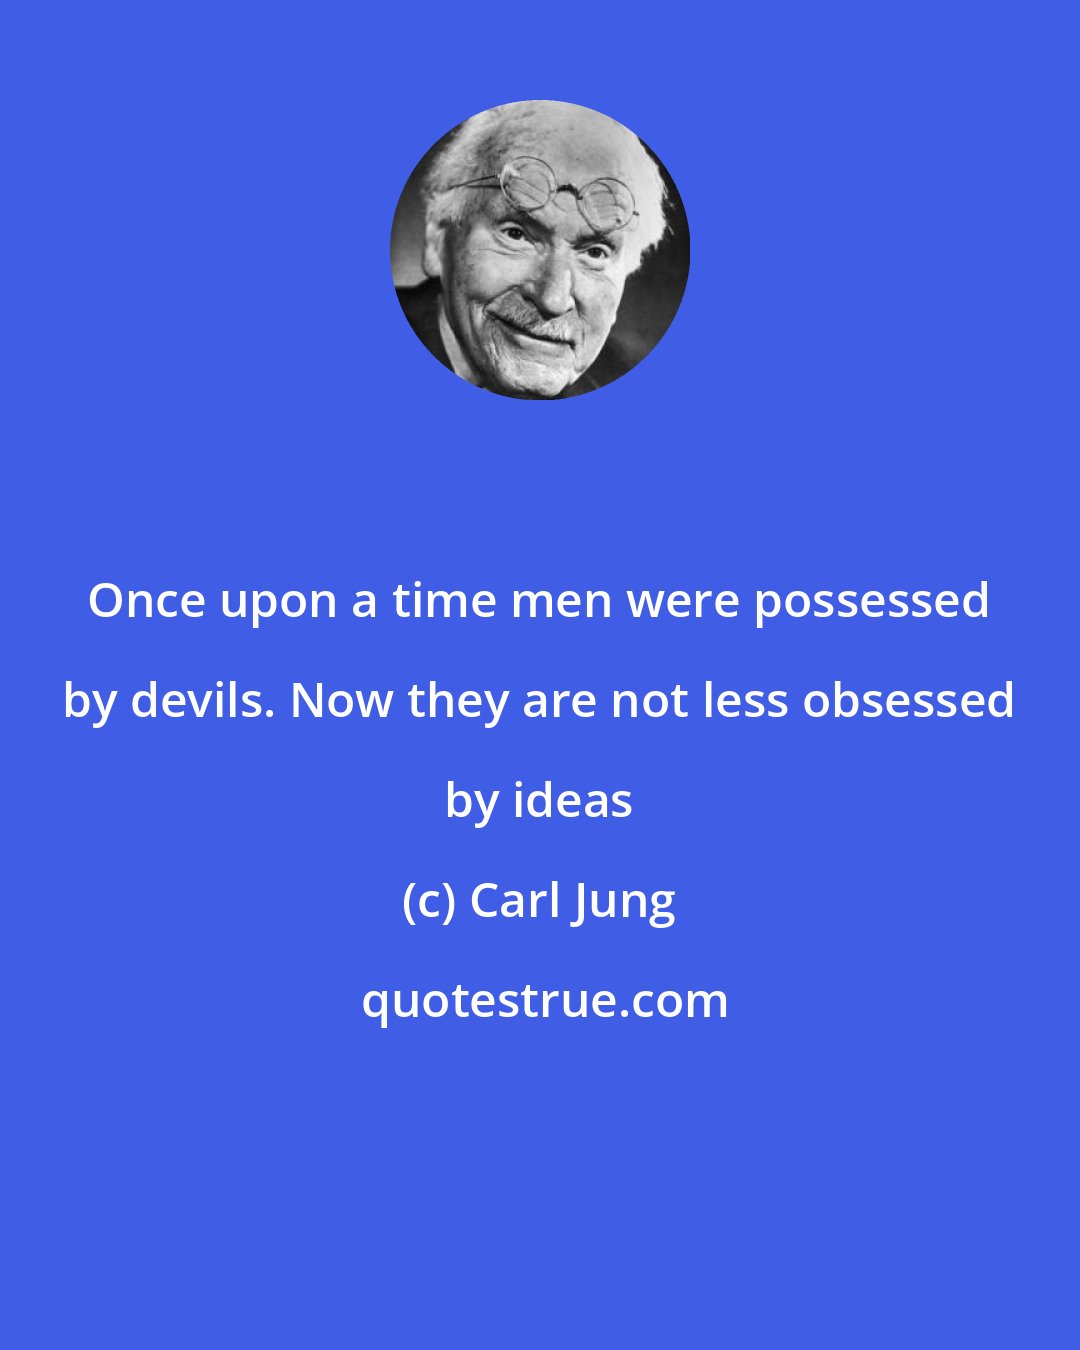 Carl Jung: Once upon a time men were possessed by devils. Now they are not less obsessed by ideas